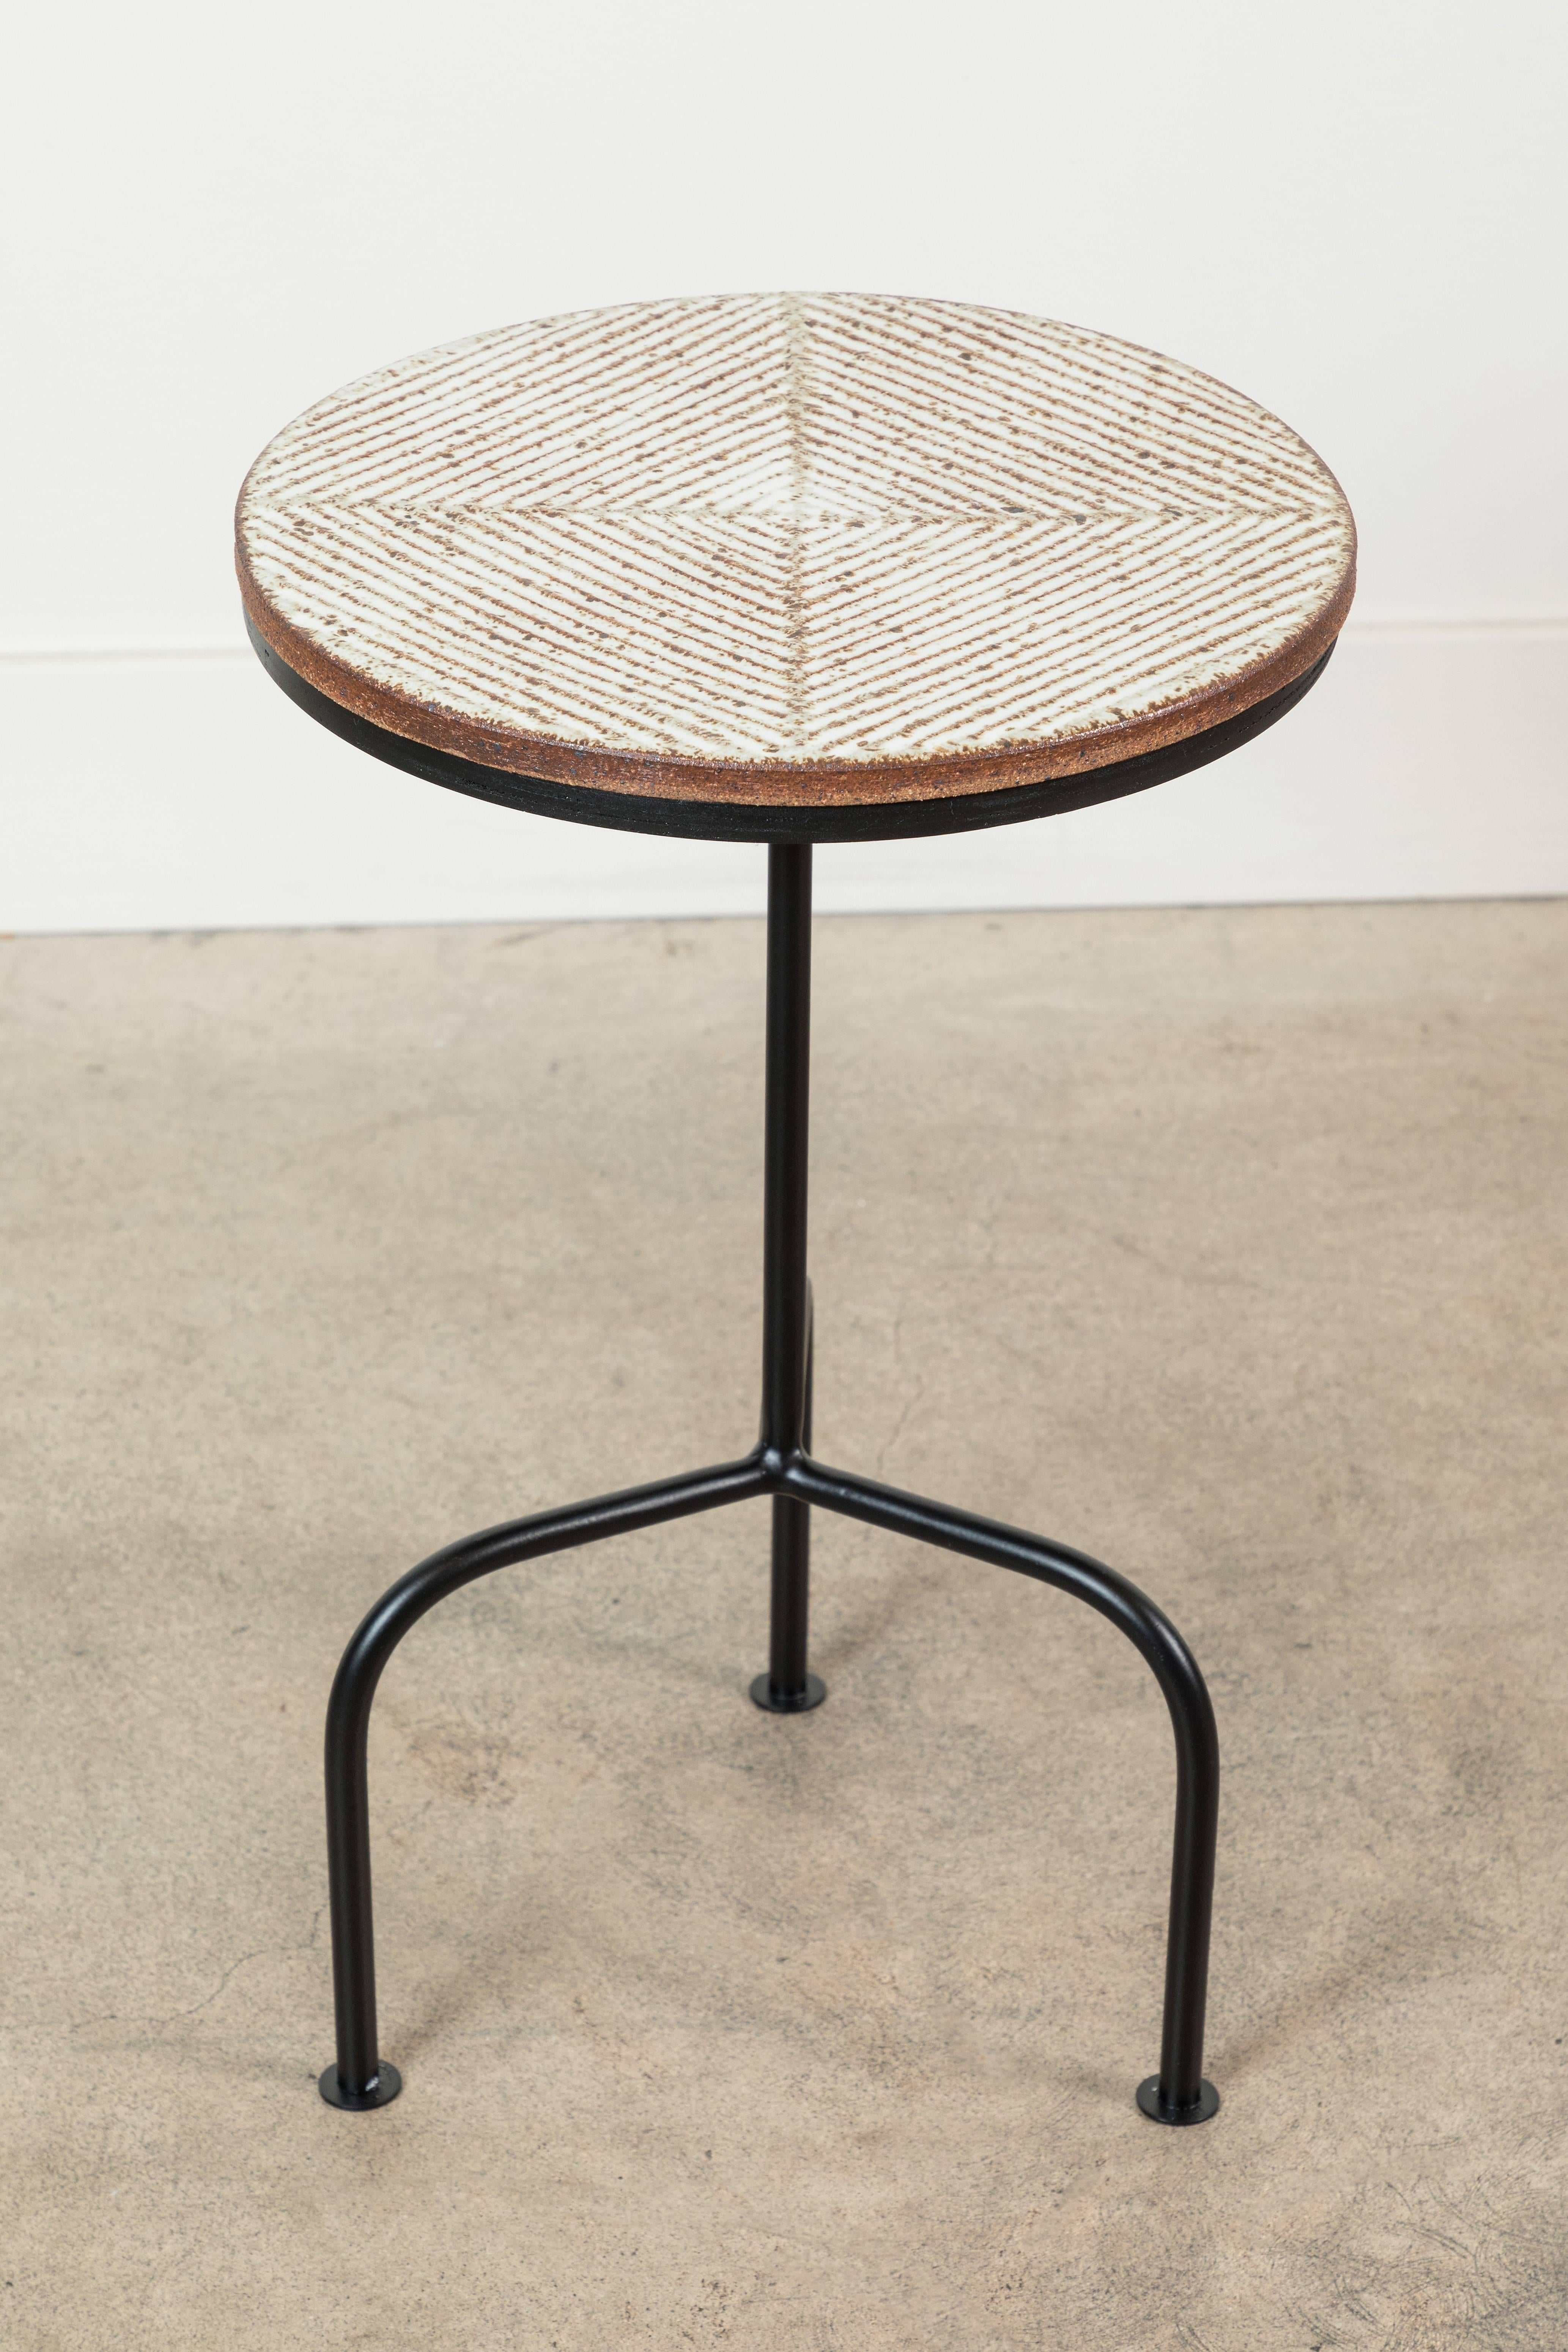 Steel and ceramic side table by Mt. Washington Pottery for Lawson-Fenning.